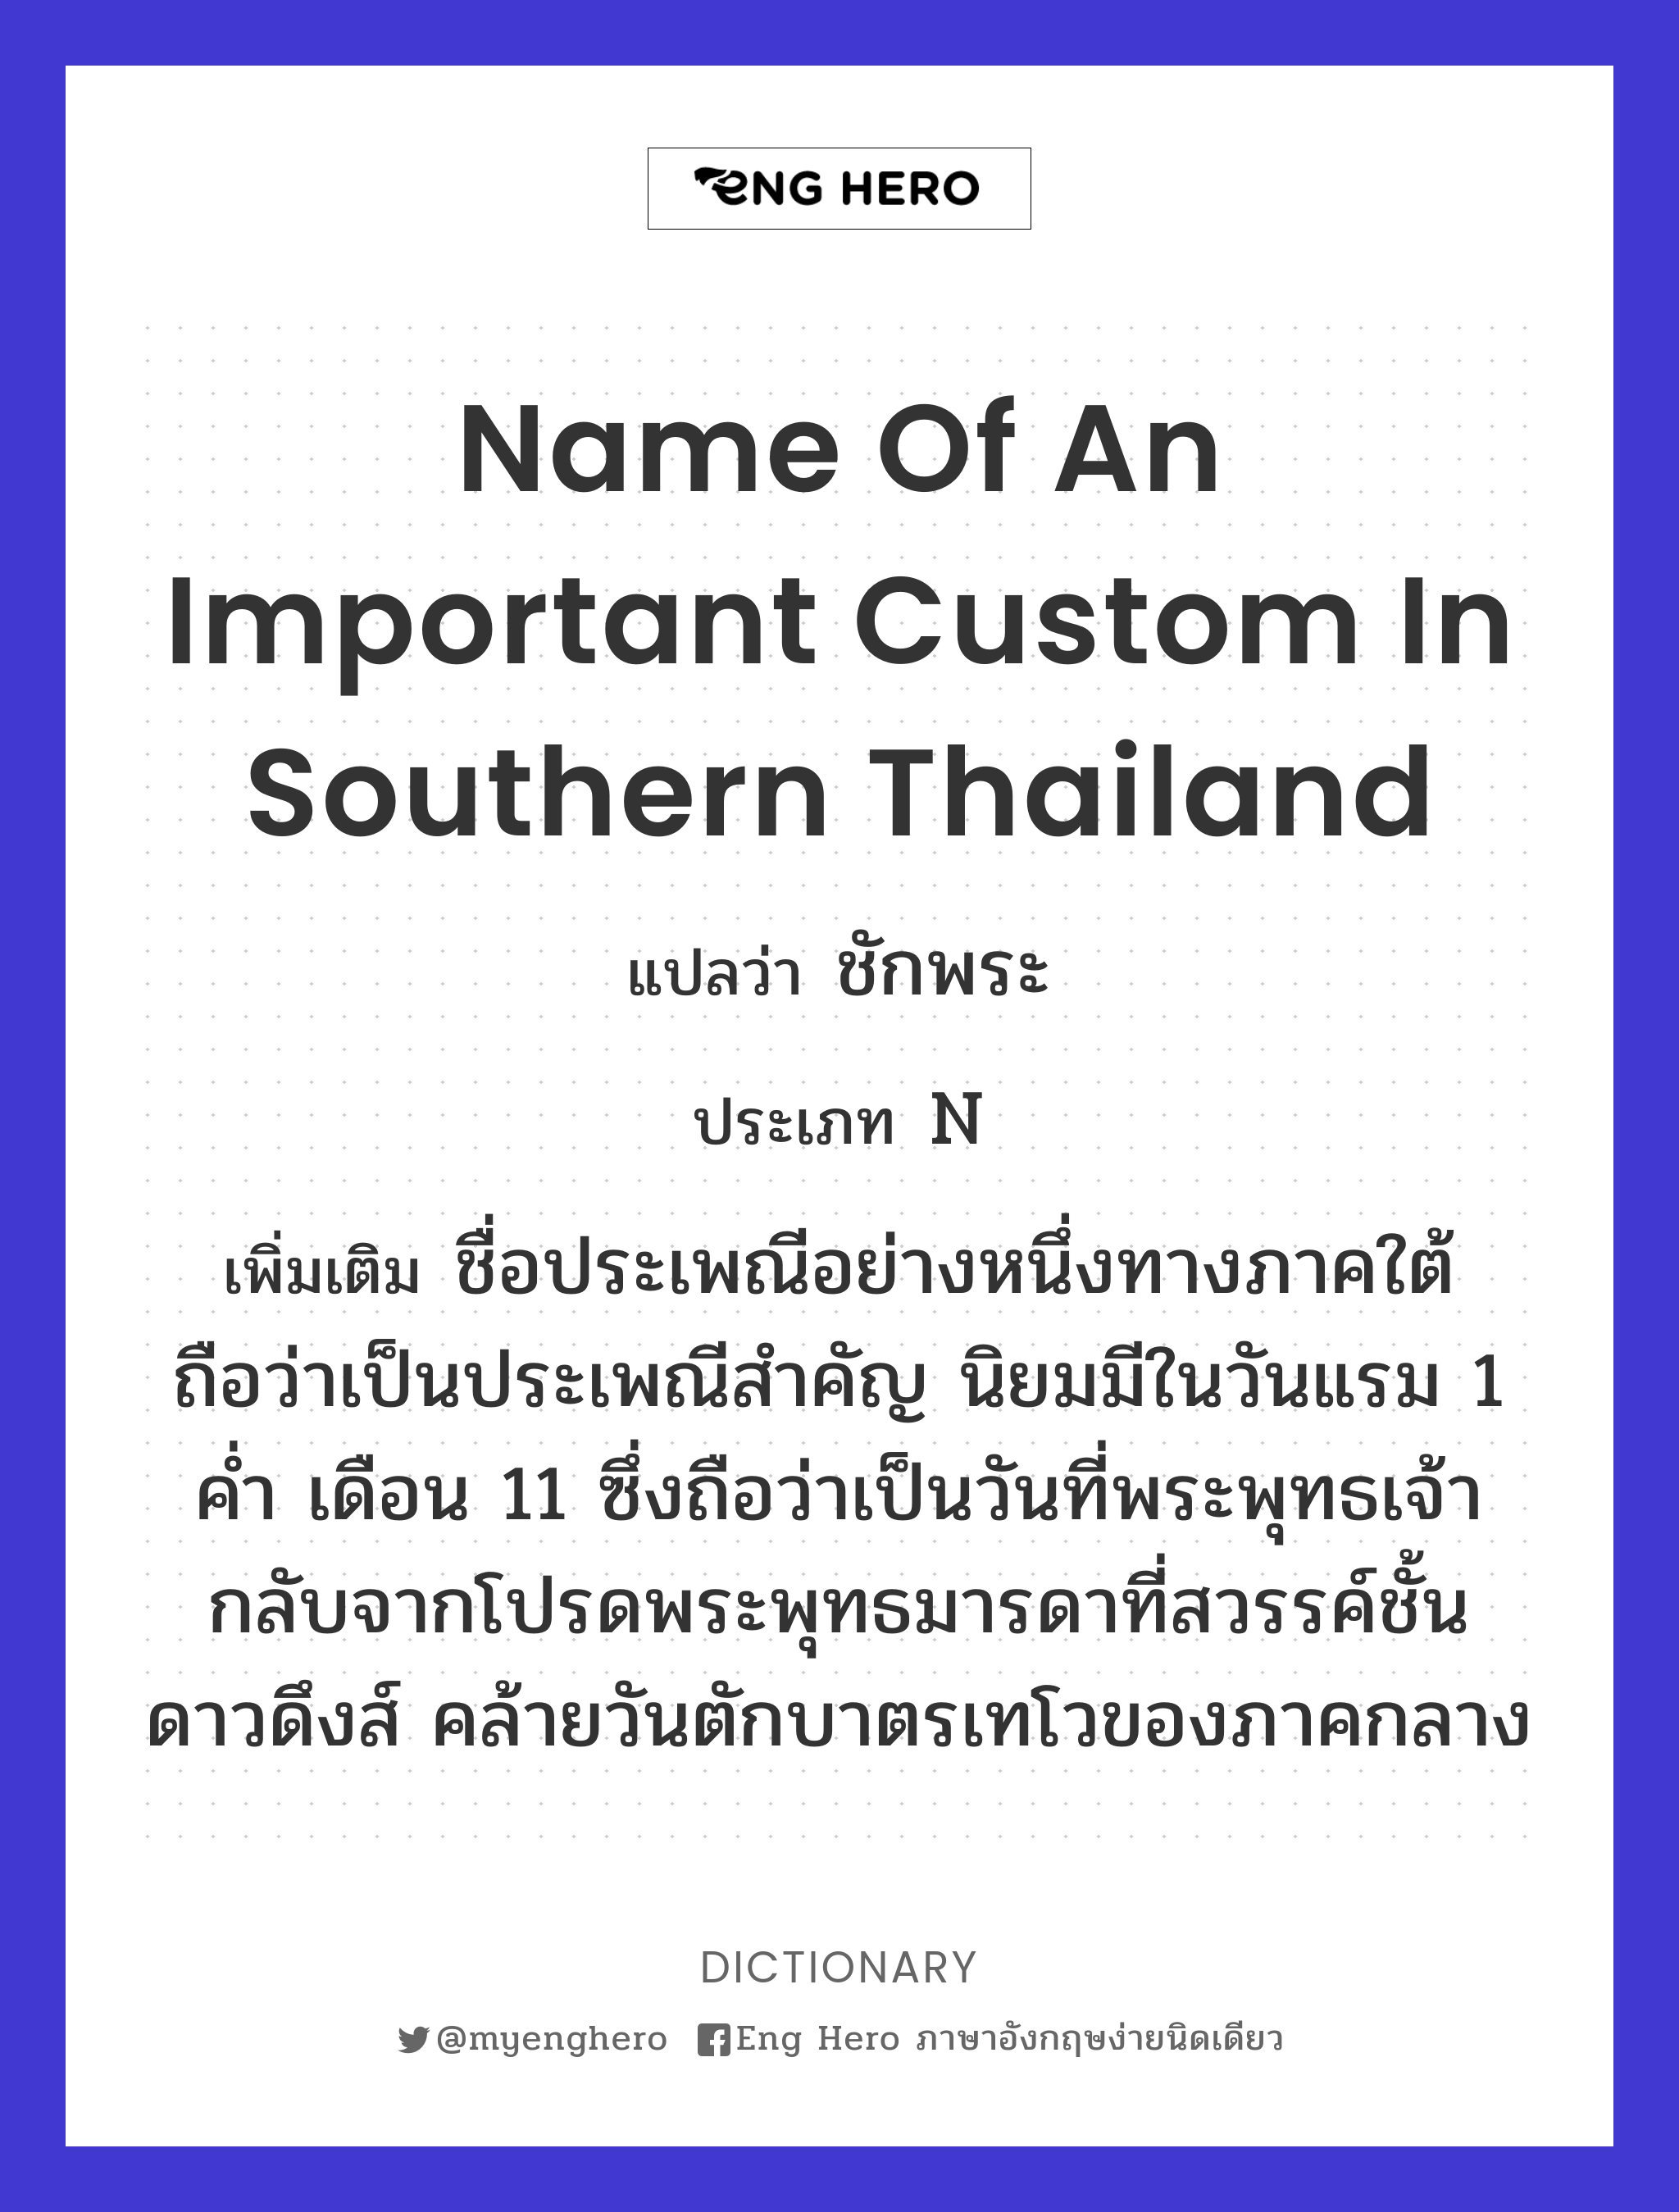 name of an important custom in southern Thailand